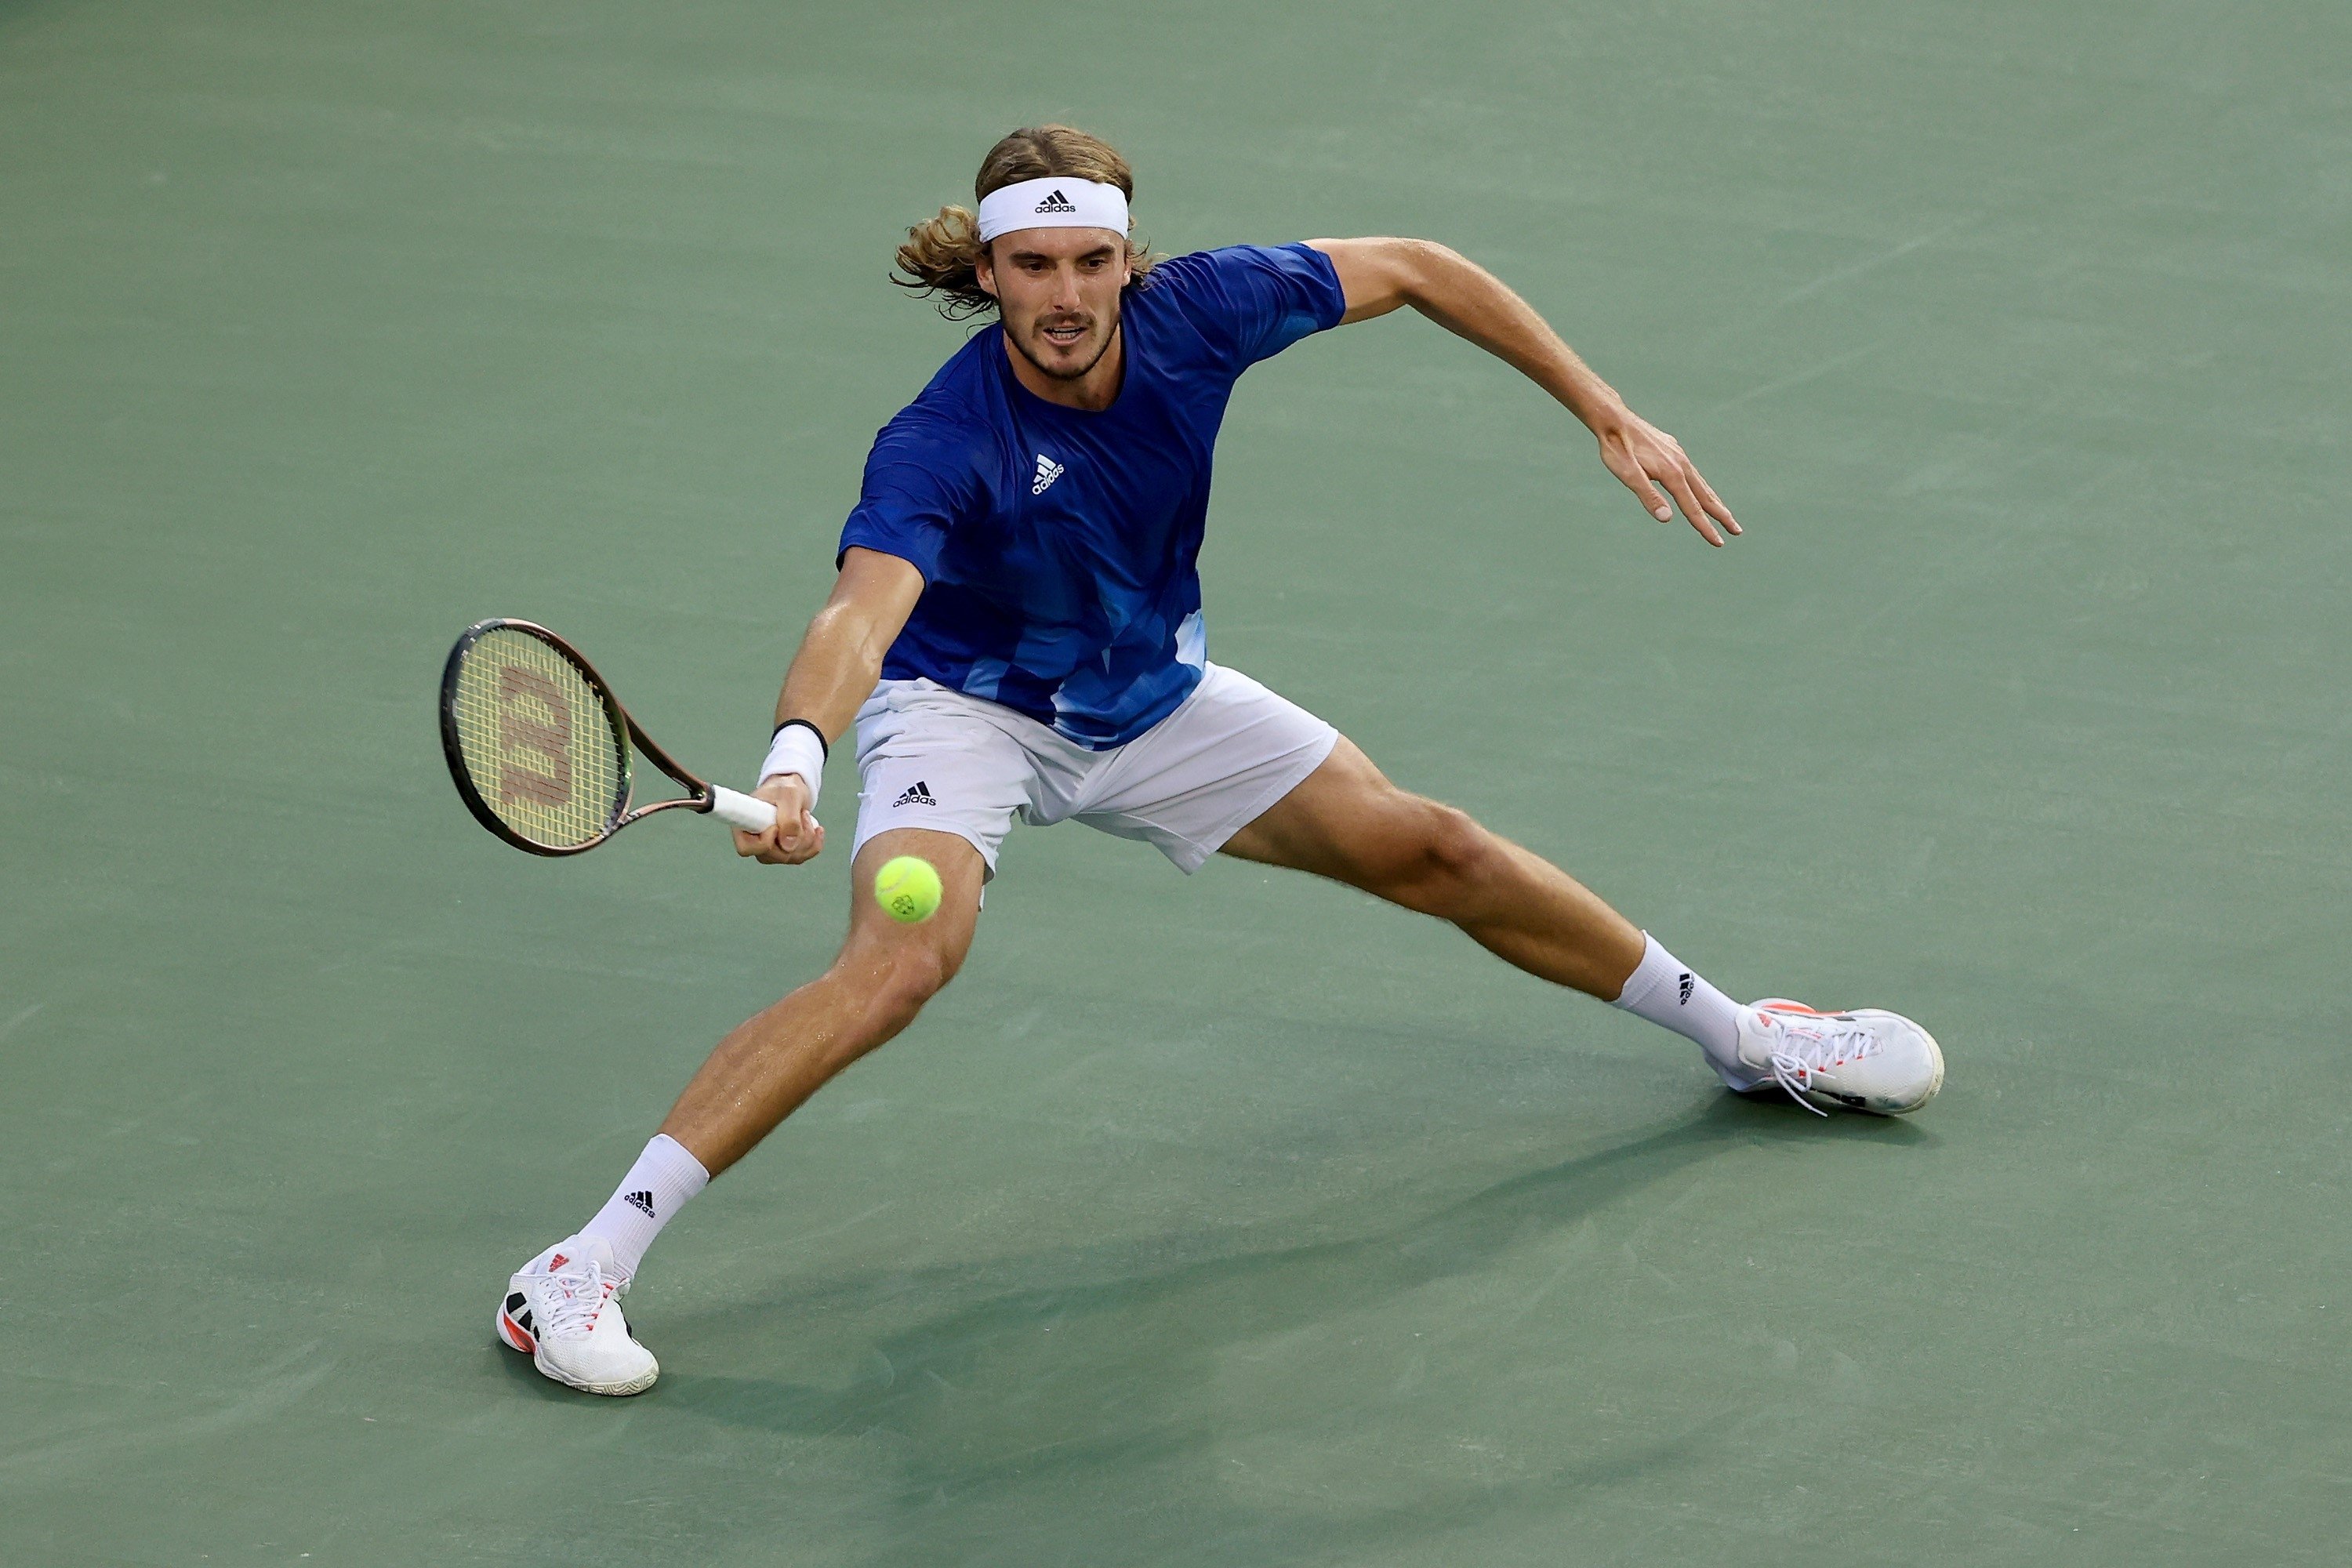 Greece's Stefanos Tsitsipas plays a forehand during his Cincinnatti Masters match against Italy's Lorenzo Sonego at the Lindner Family Tennis Center, Mason, Ohio, U.S., Aug. 19, 2021. (AFP Photo)